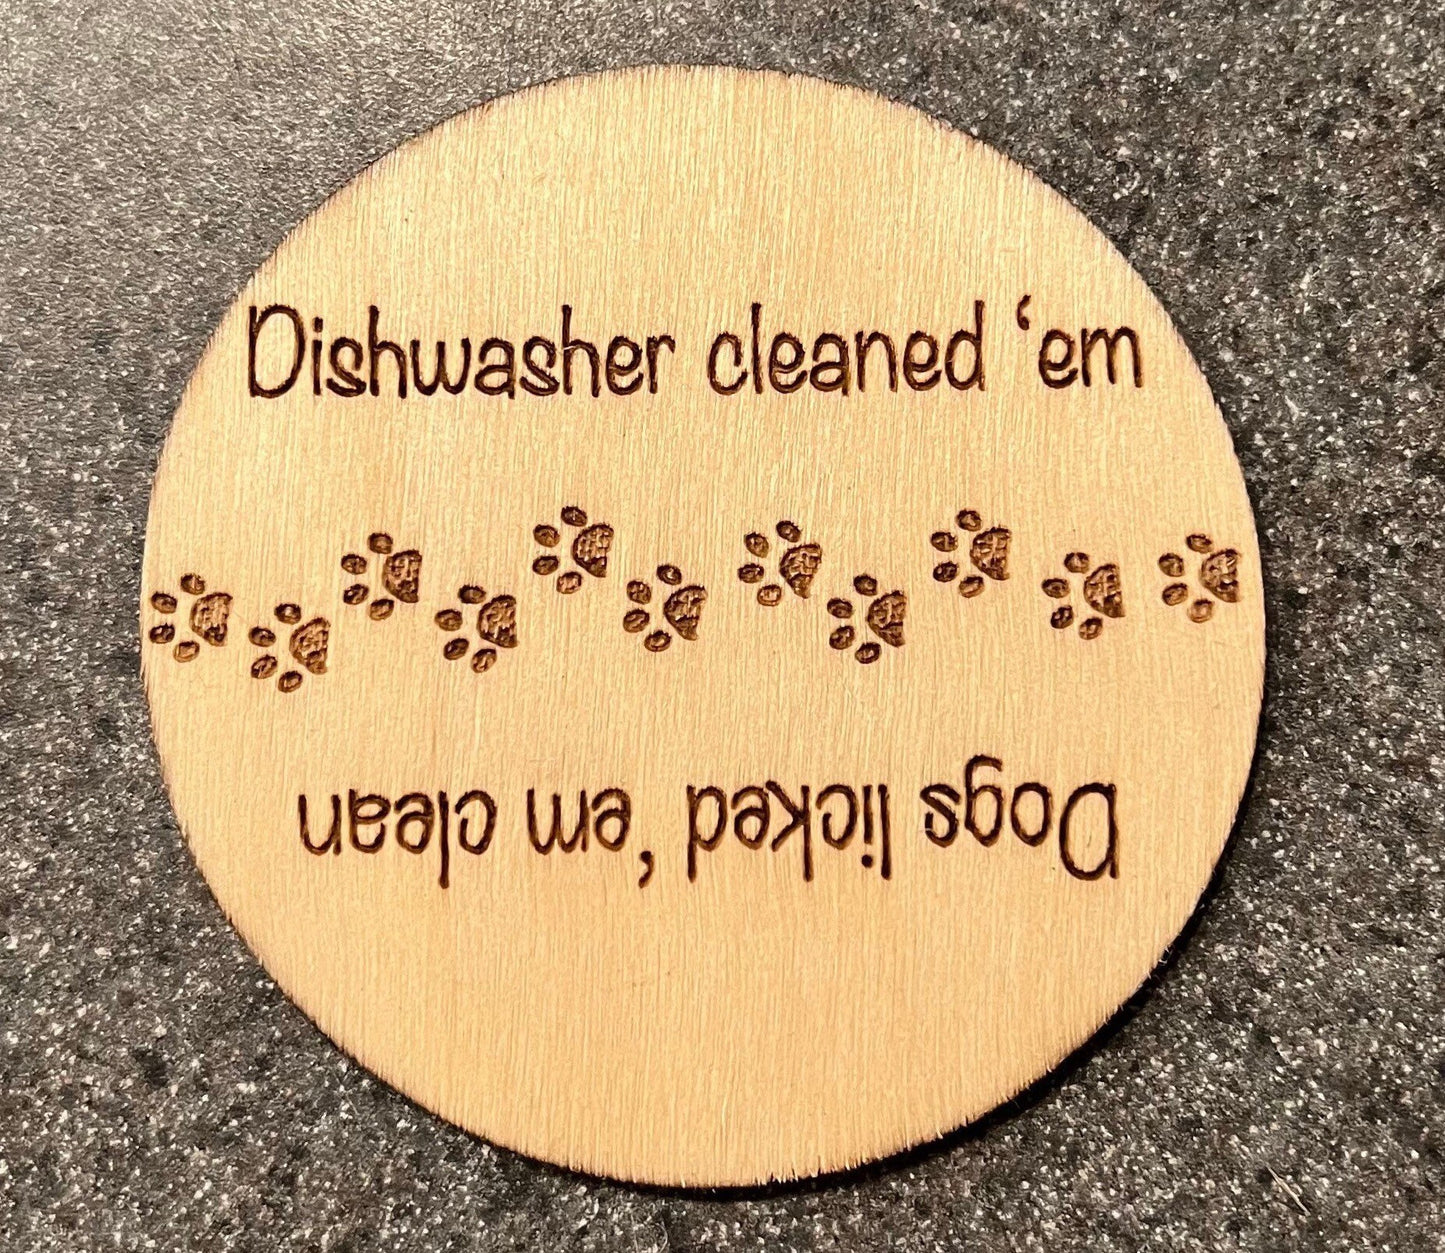 Dogs licked them clean Dishwasher Magnet, Laser Engraved